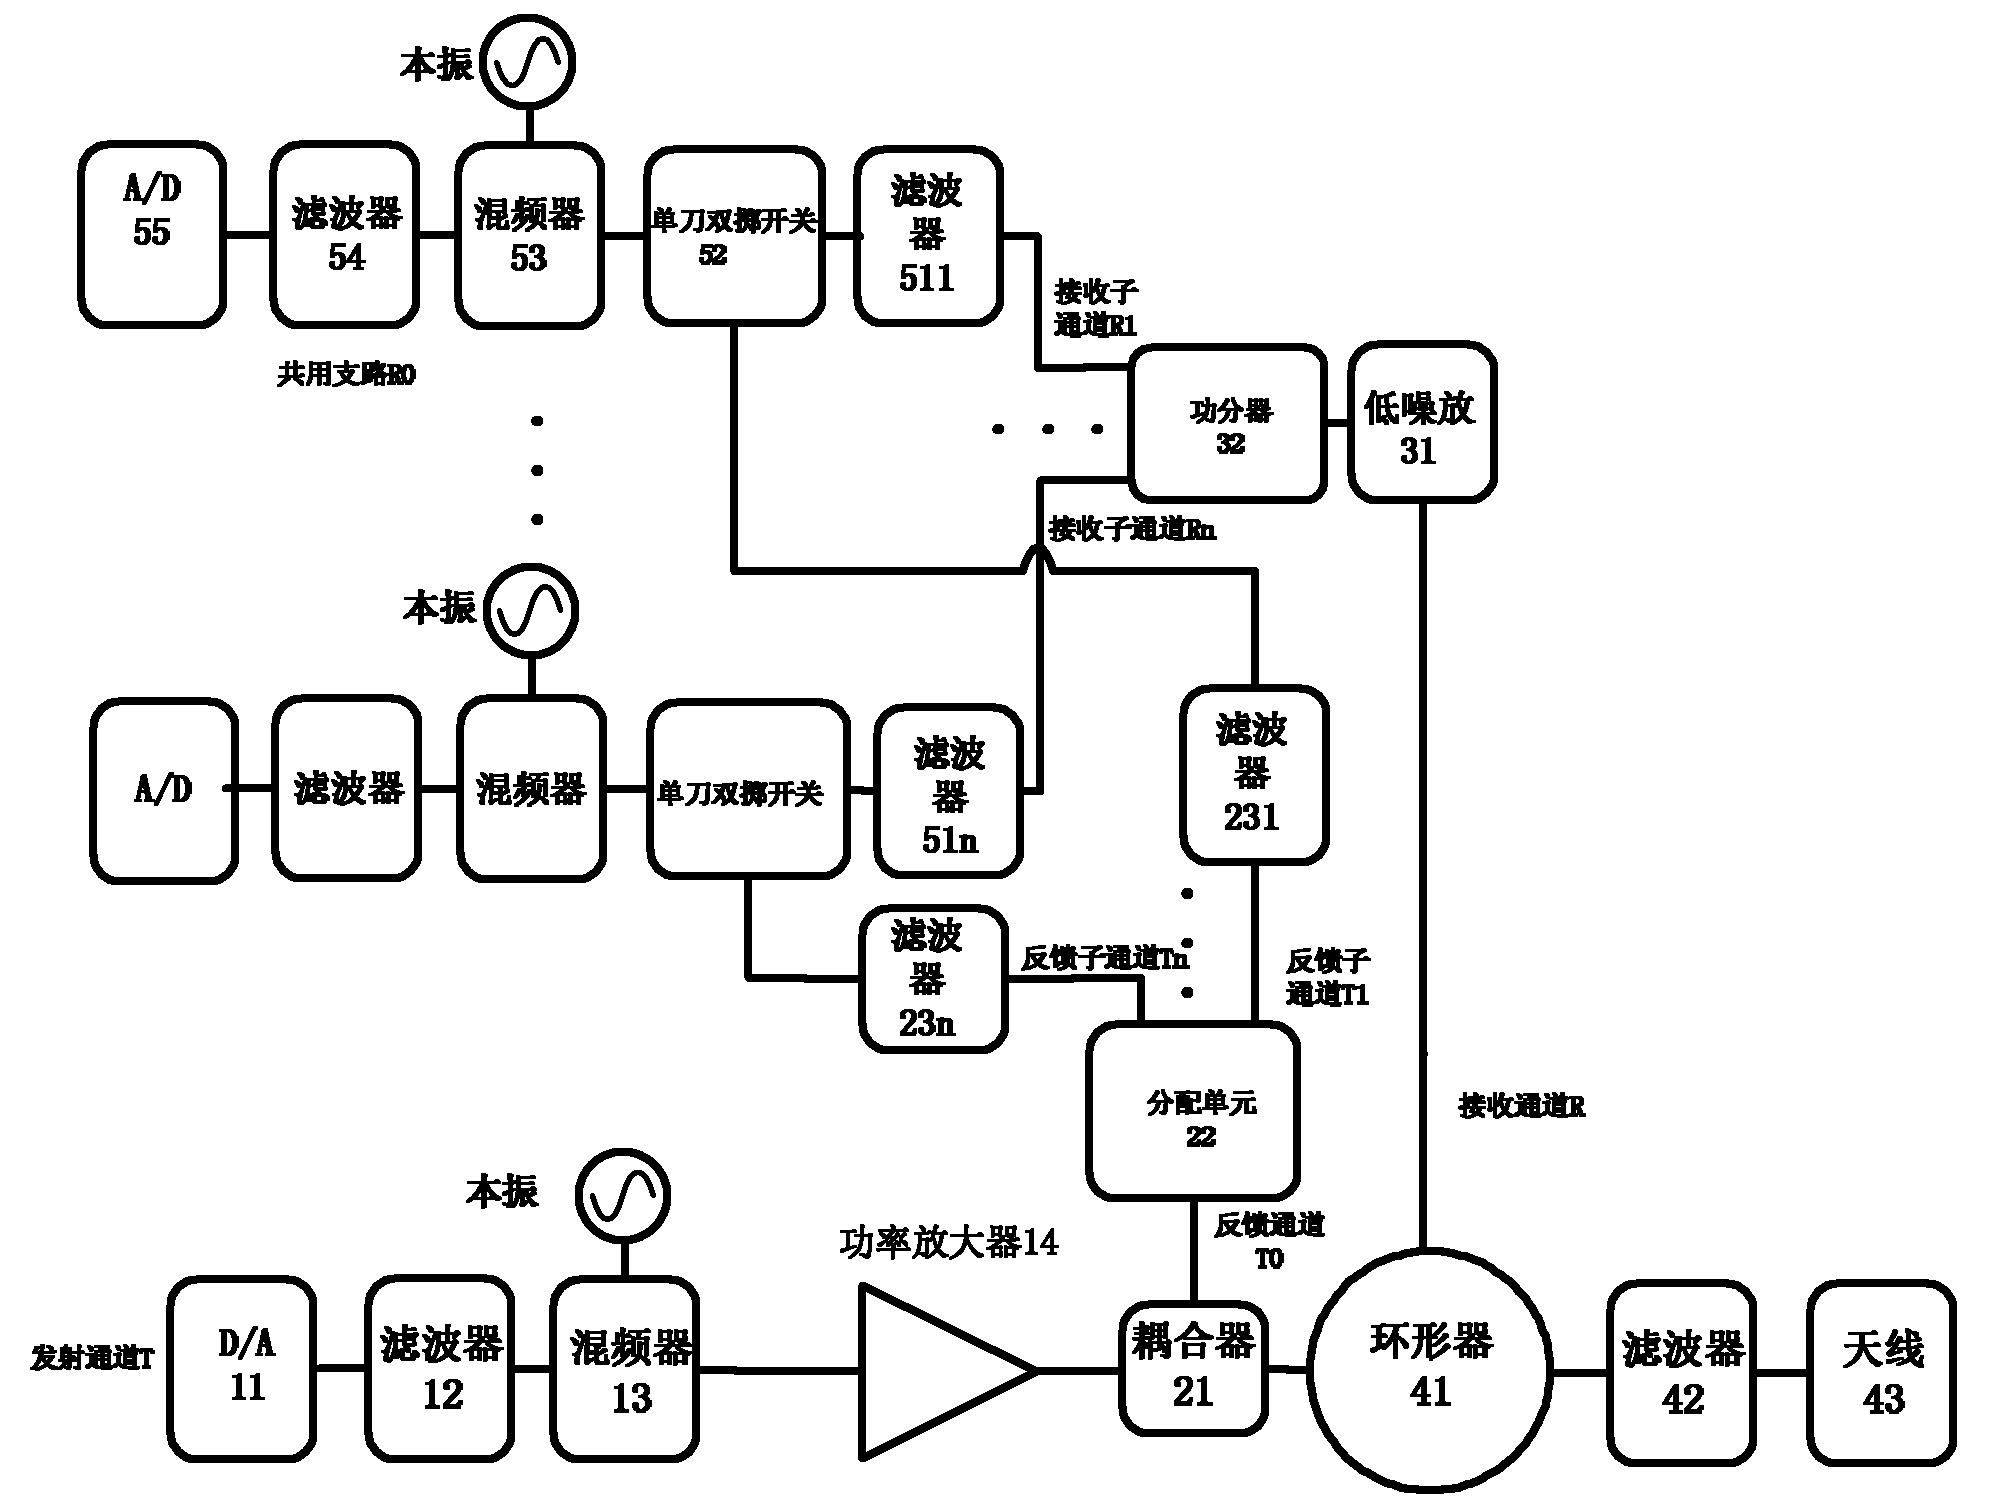 TDD (time division duplex) radio-frequency receiving/emission circuit for discrete baseband signals